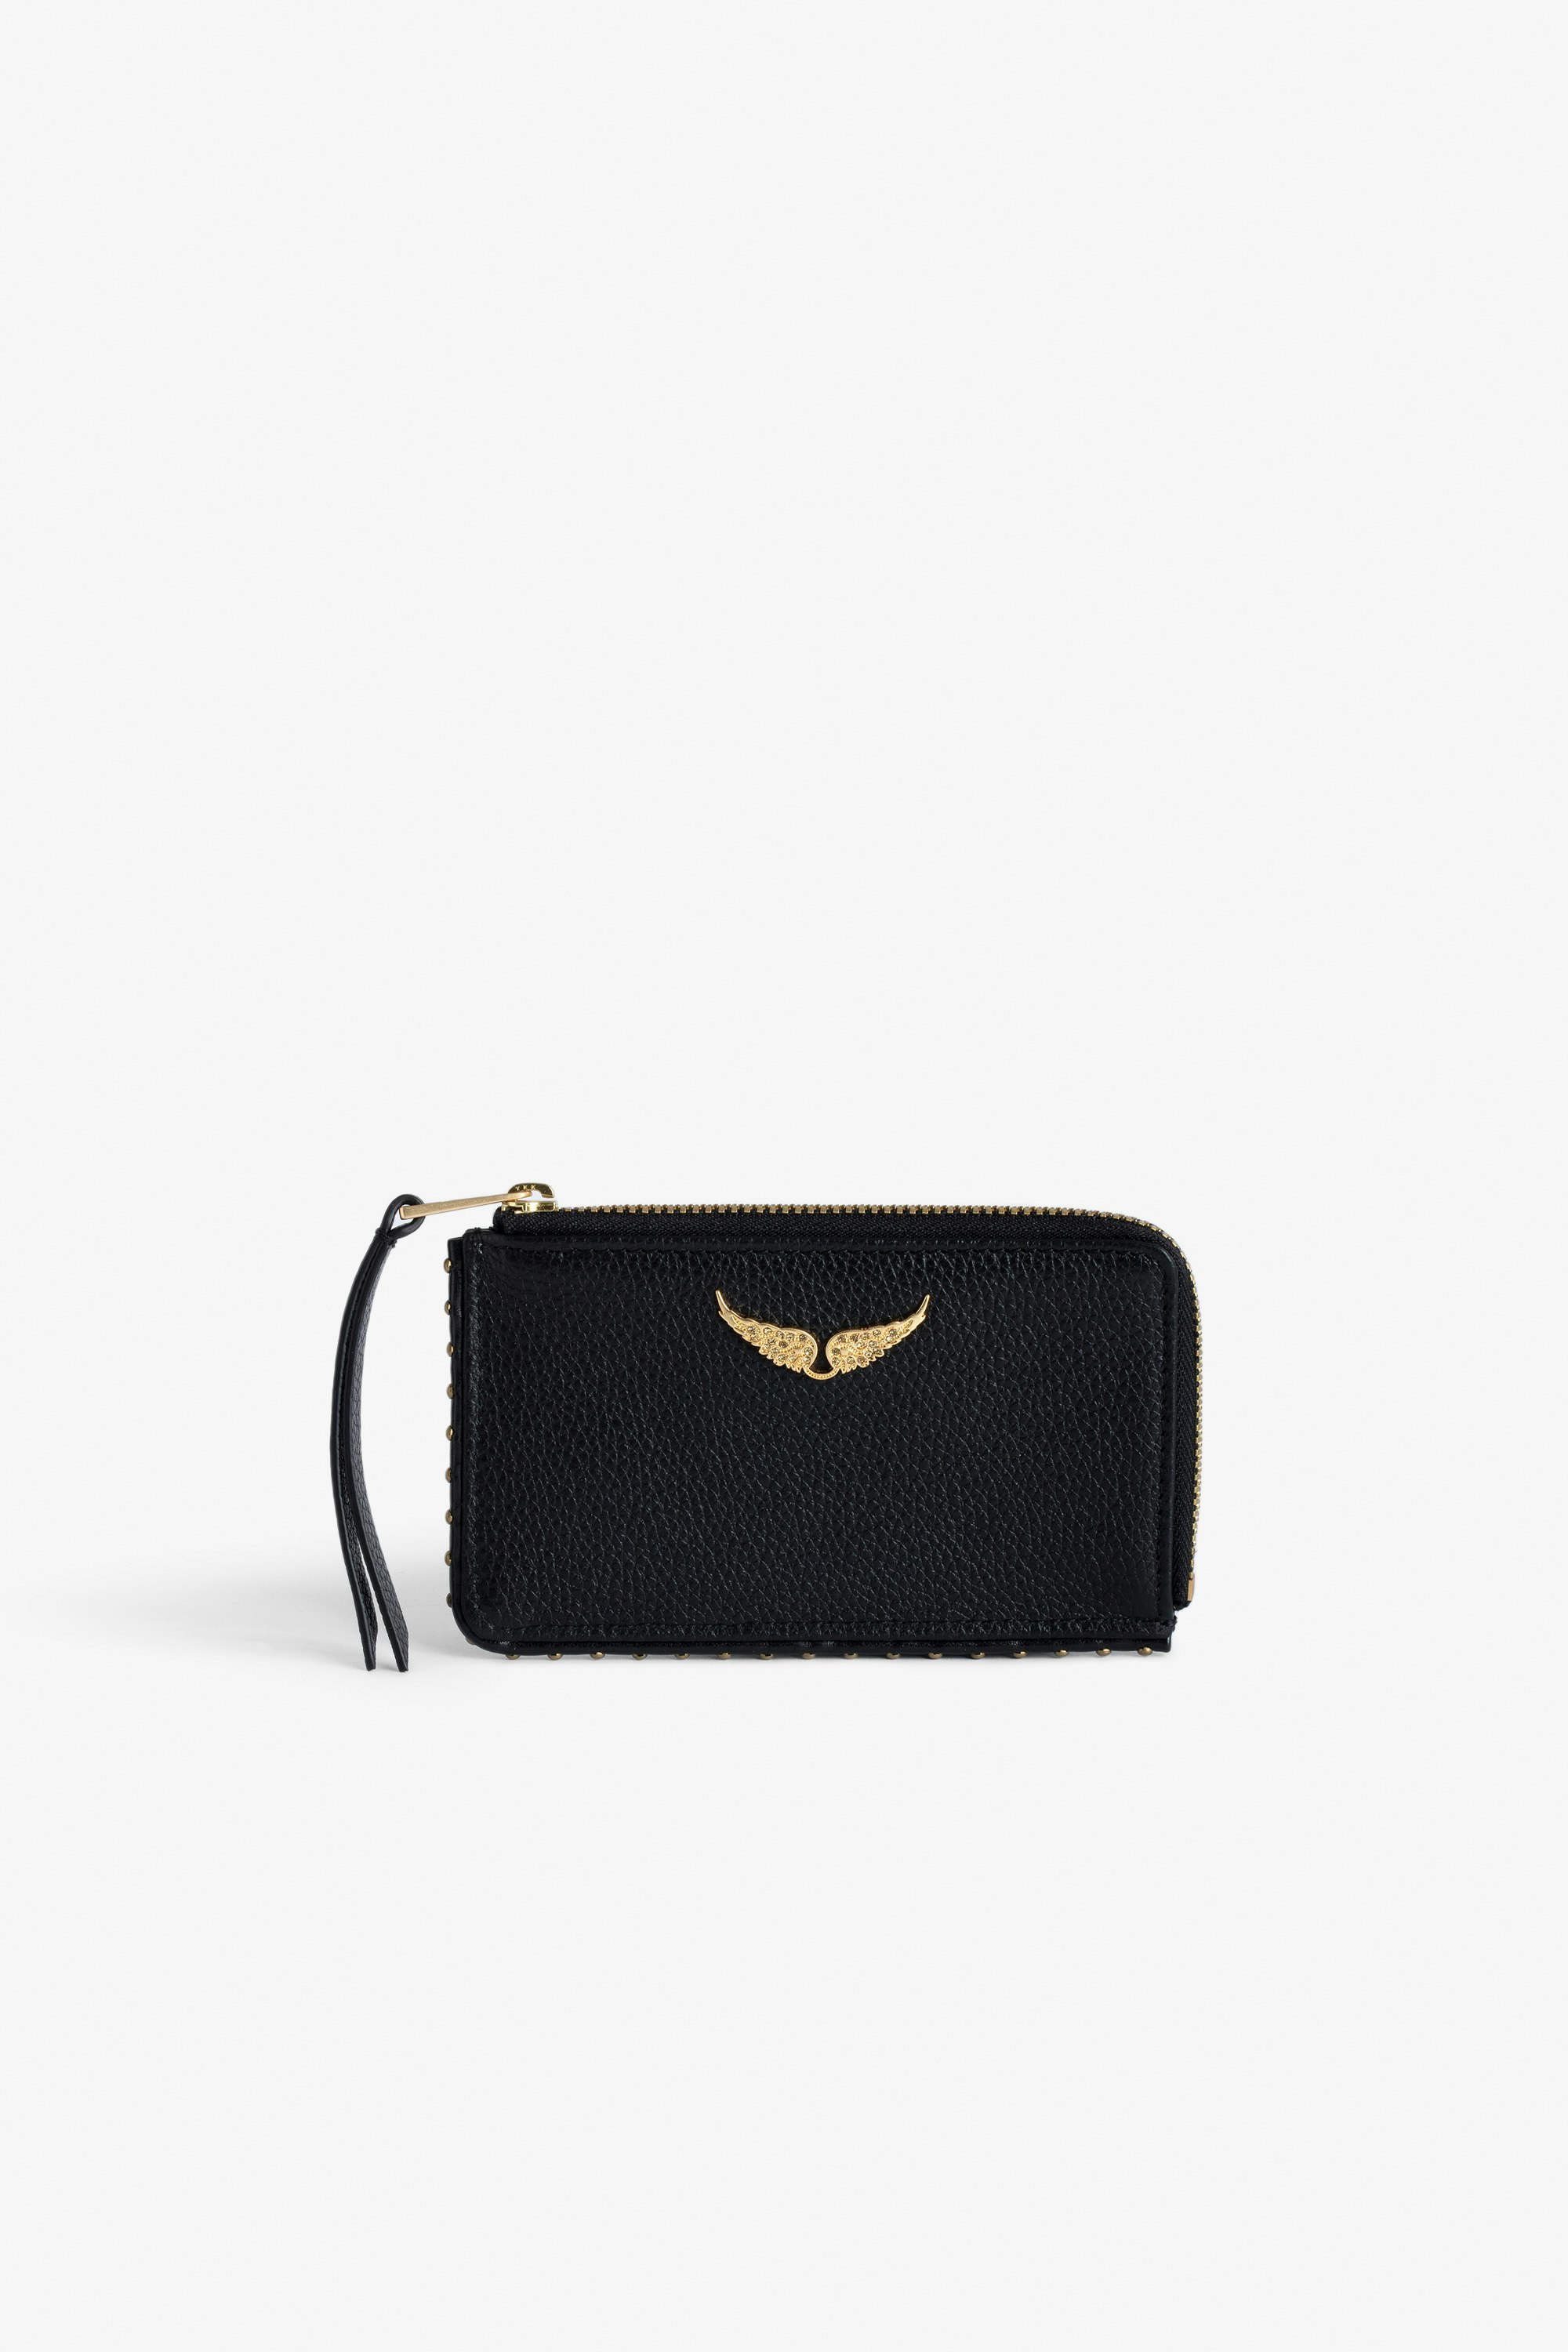 ZV Card 財布 Women’s black grained leather card holder with studded trim and wings charm.